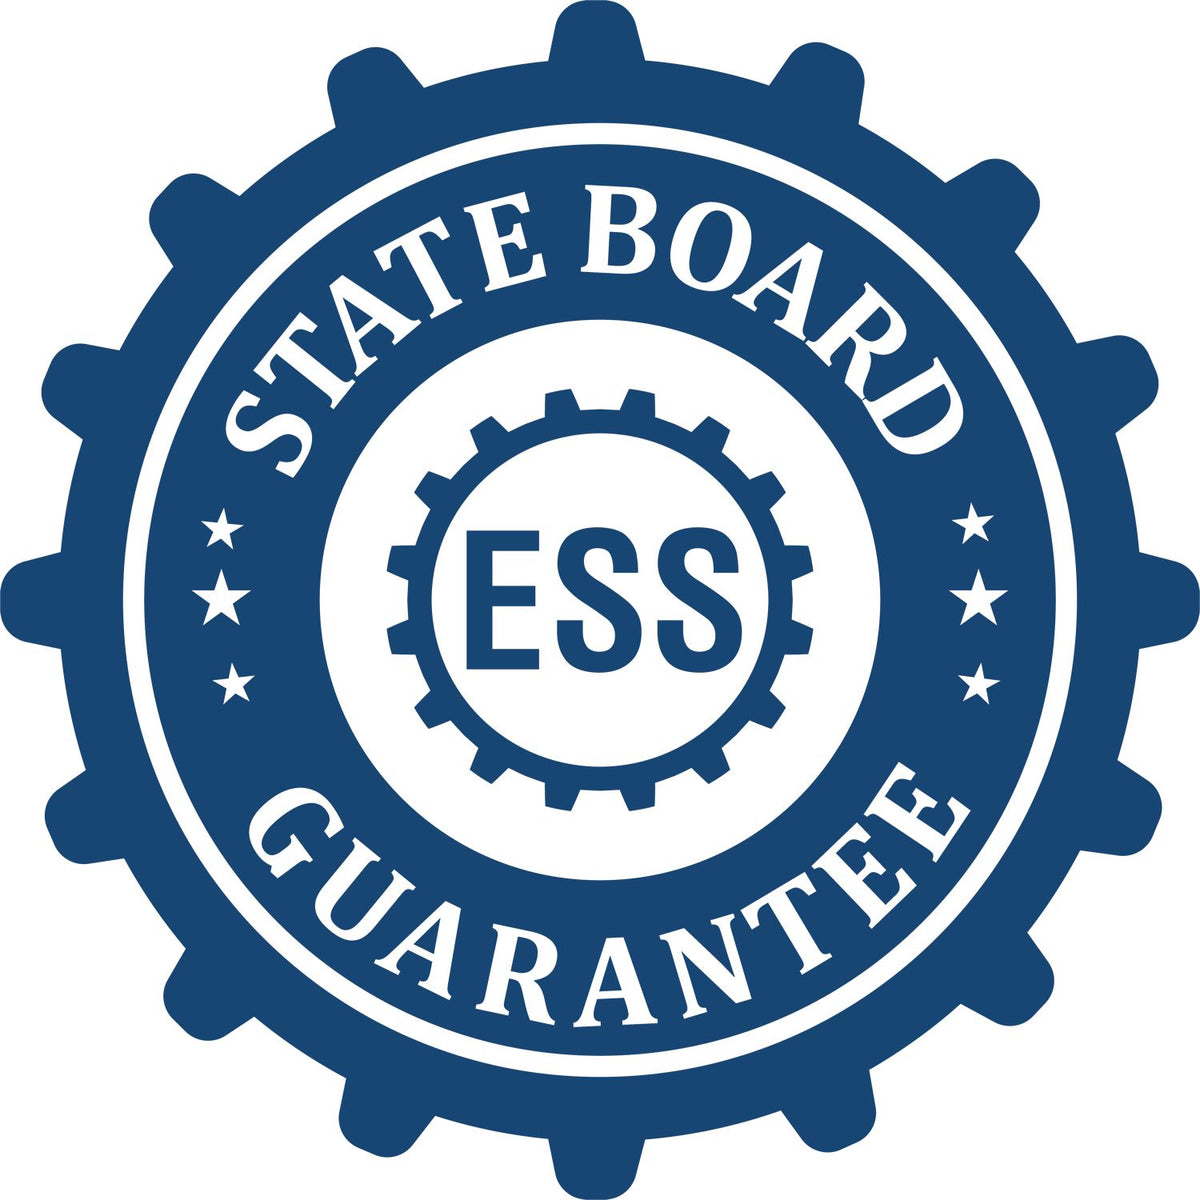 An emblem in a gear shape illustrating a state board guarantee for the Hybrid New Hampshire Landscape Architect Seal